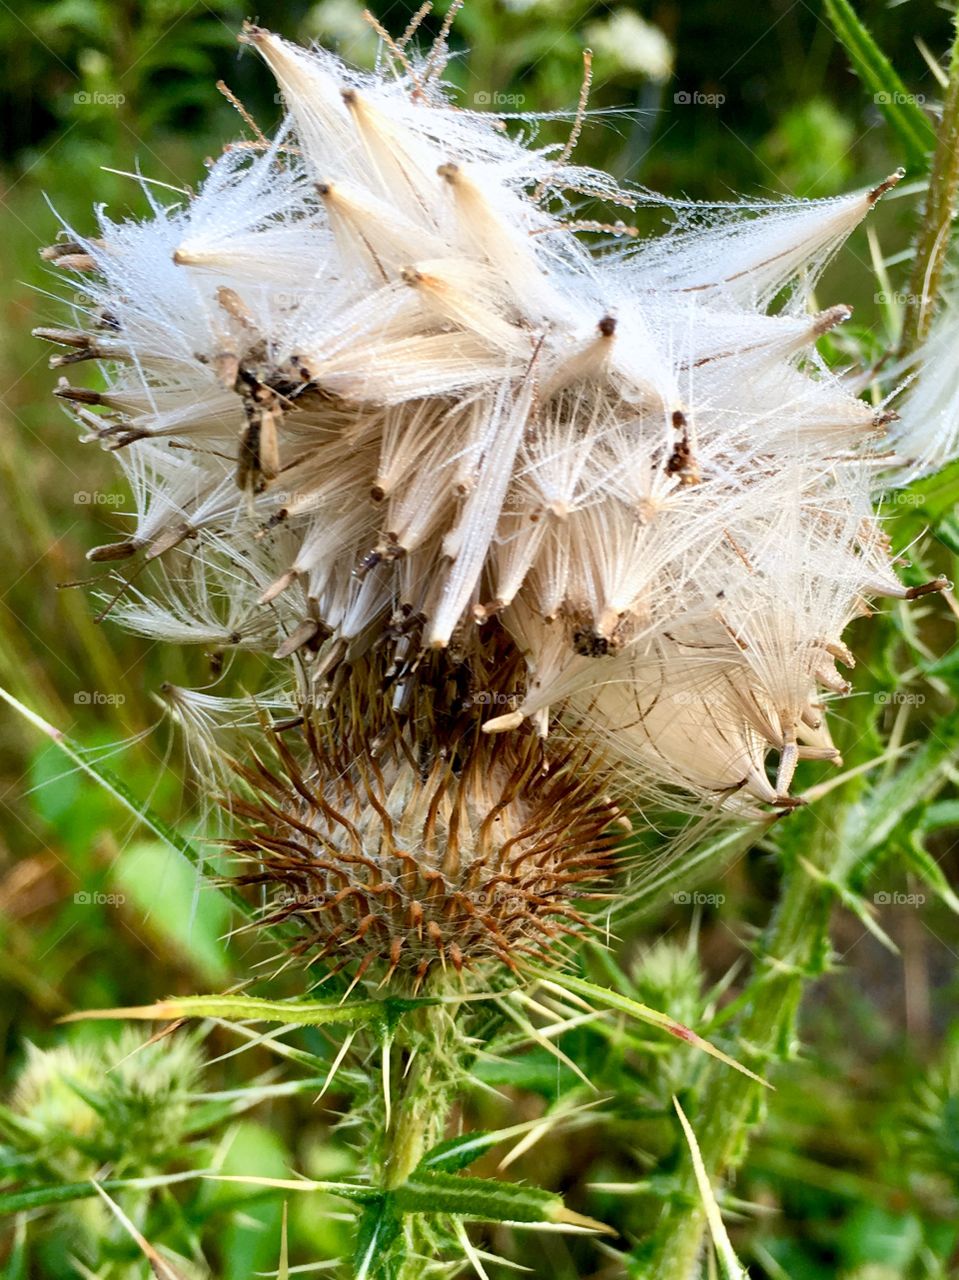 Bull thistle flower gone to seed 